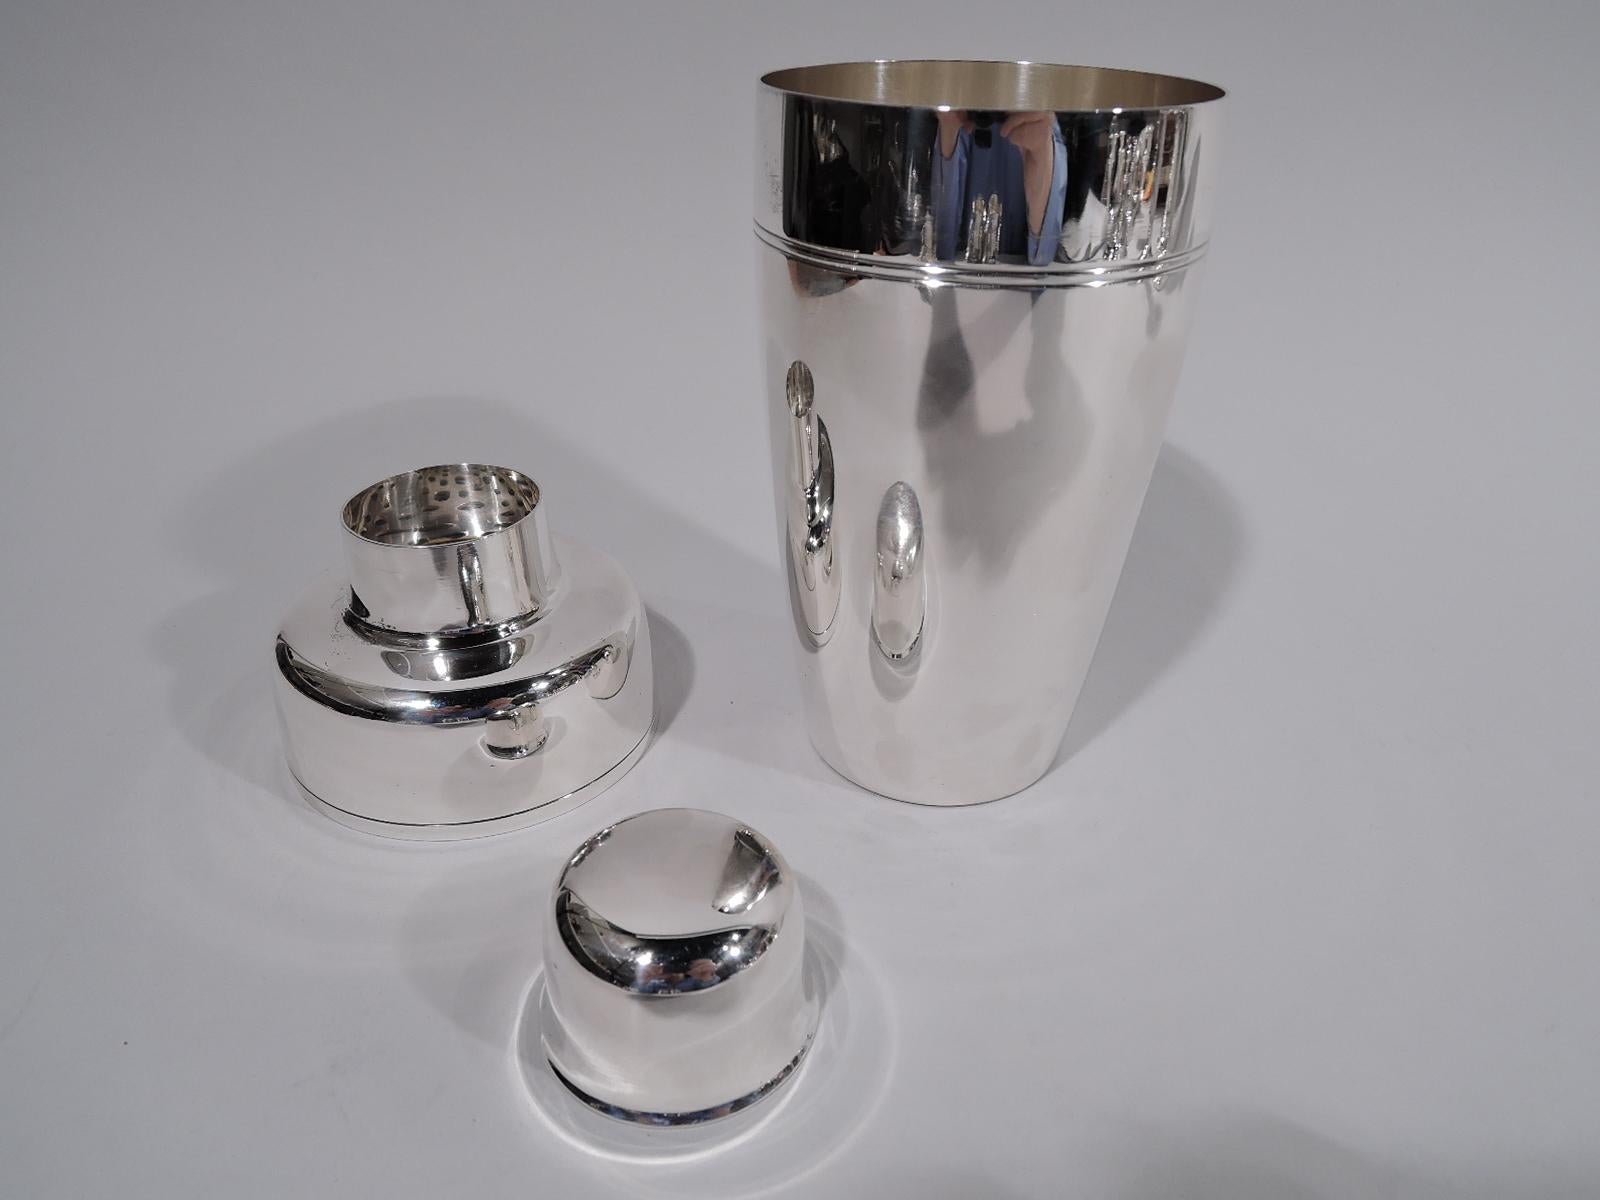 Mid-Century Modern sterling silver cocktail shaker. Made by Tiffany & Co. in New York, ca 1947. The classic bullet form comprising tapering cup, curved shoulders, and central spout with built-in strainer. Cap has flared rim. Spare with incised